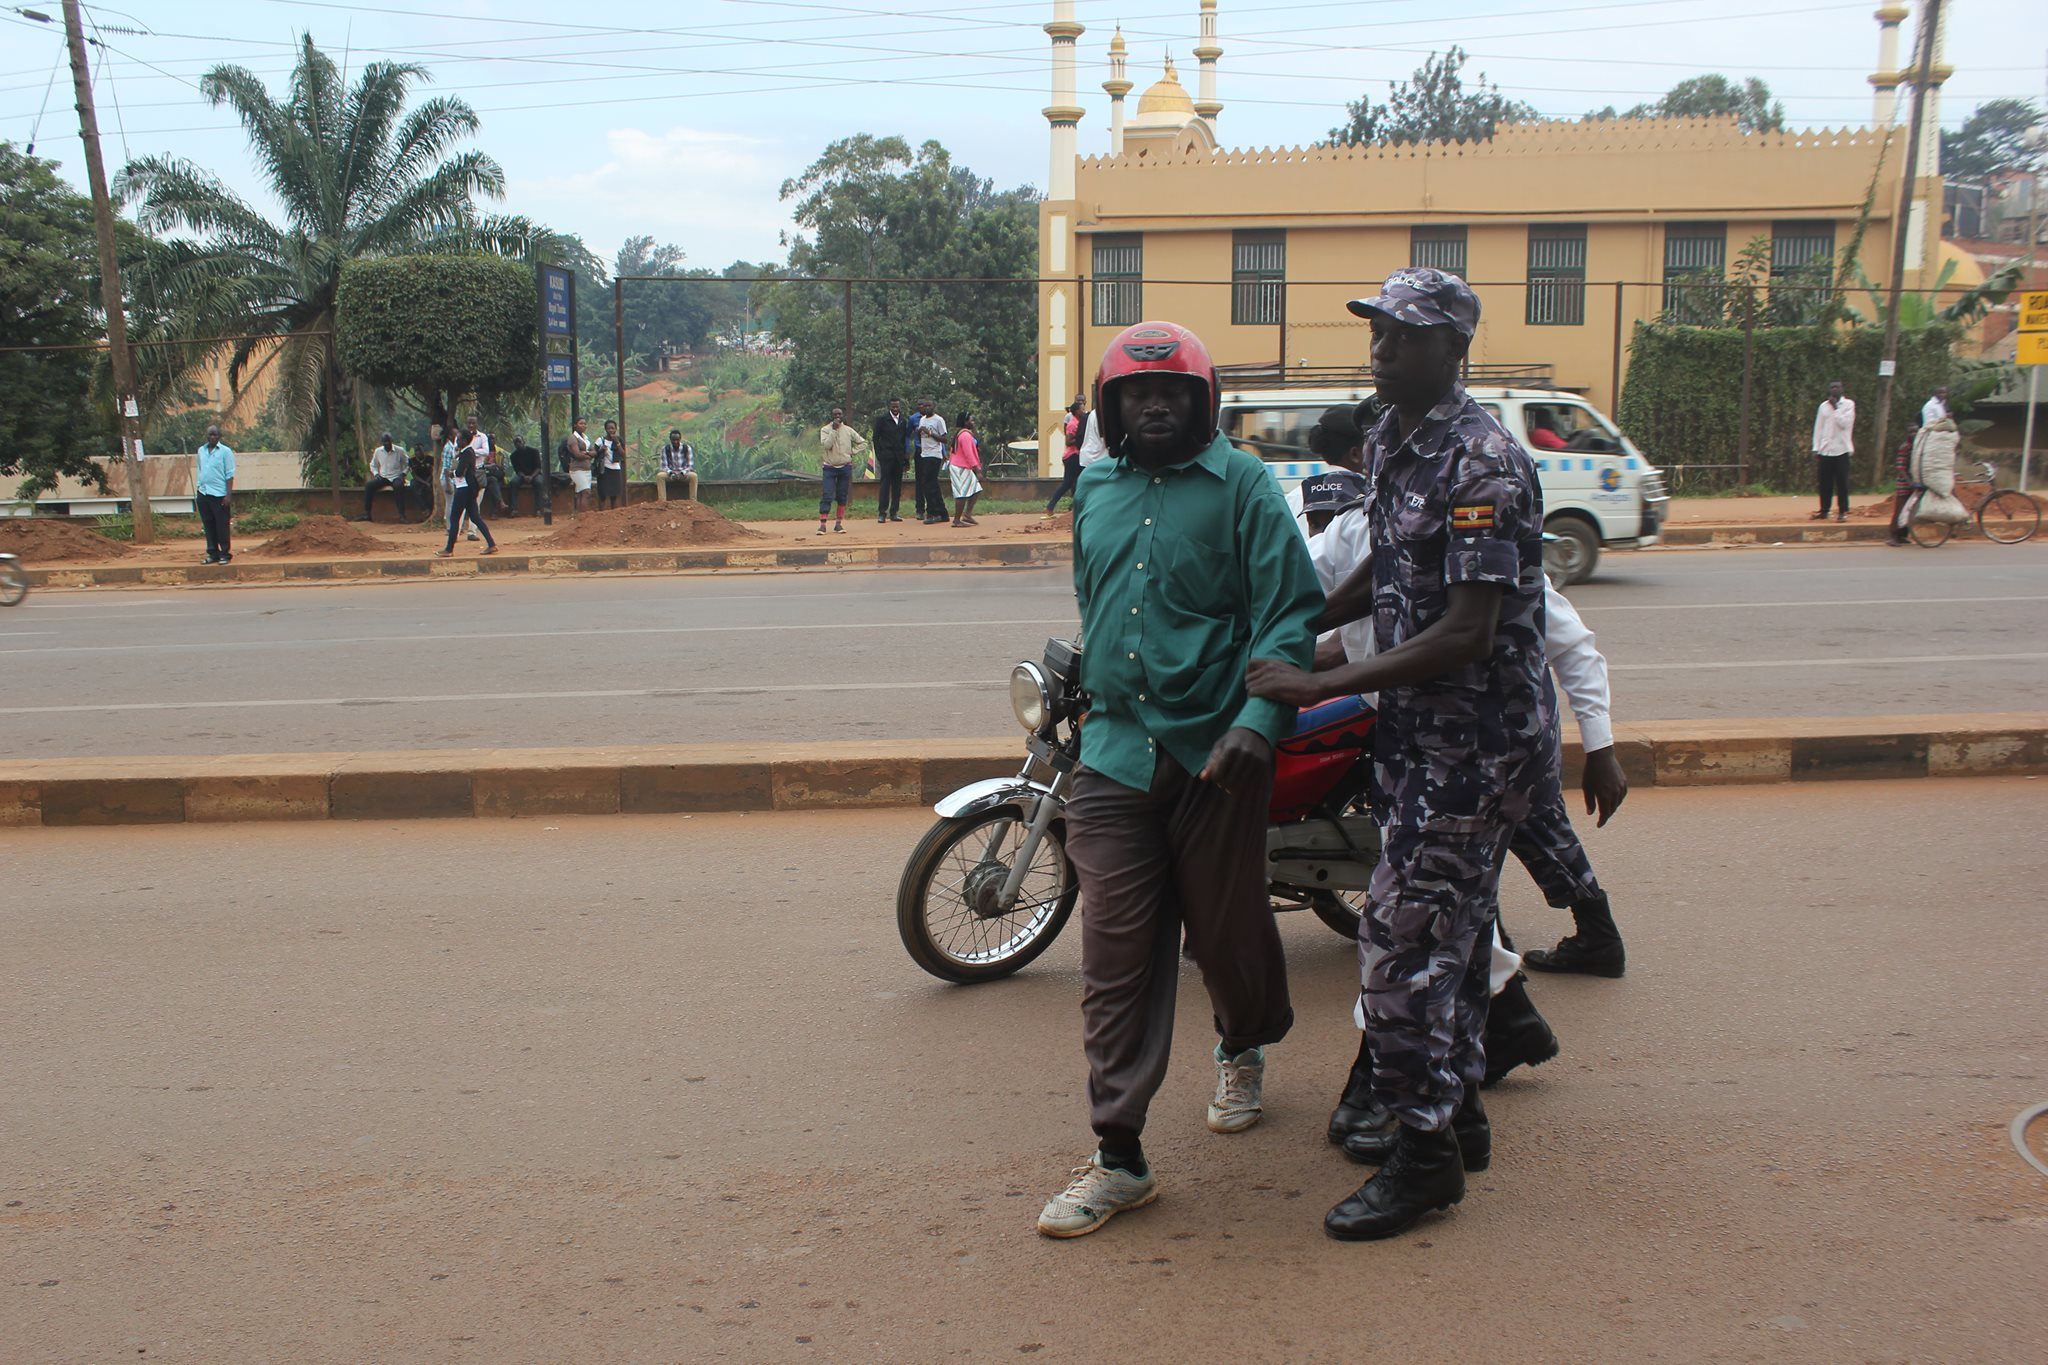 A boda guy and his boda being taken away after police found him without papers 